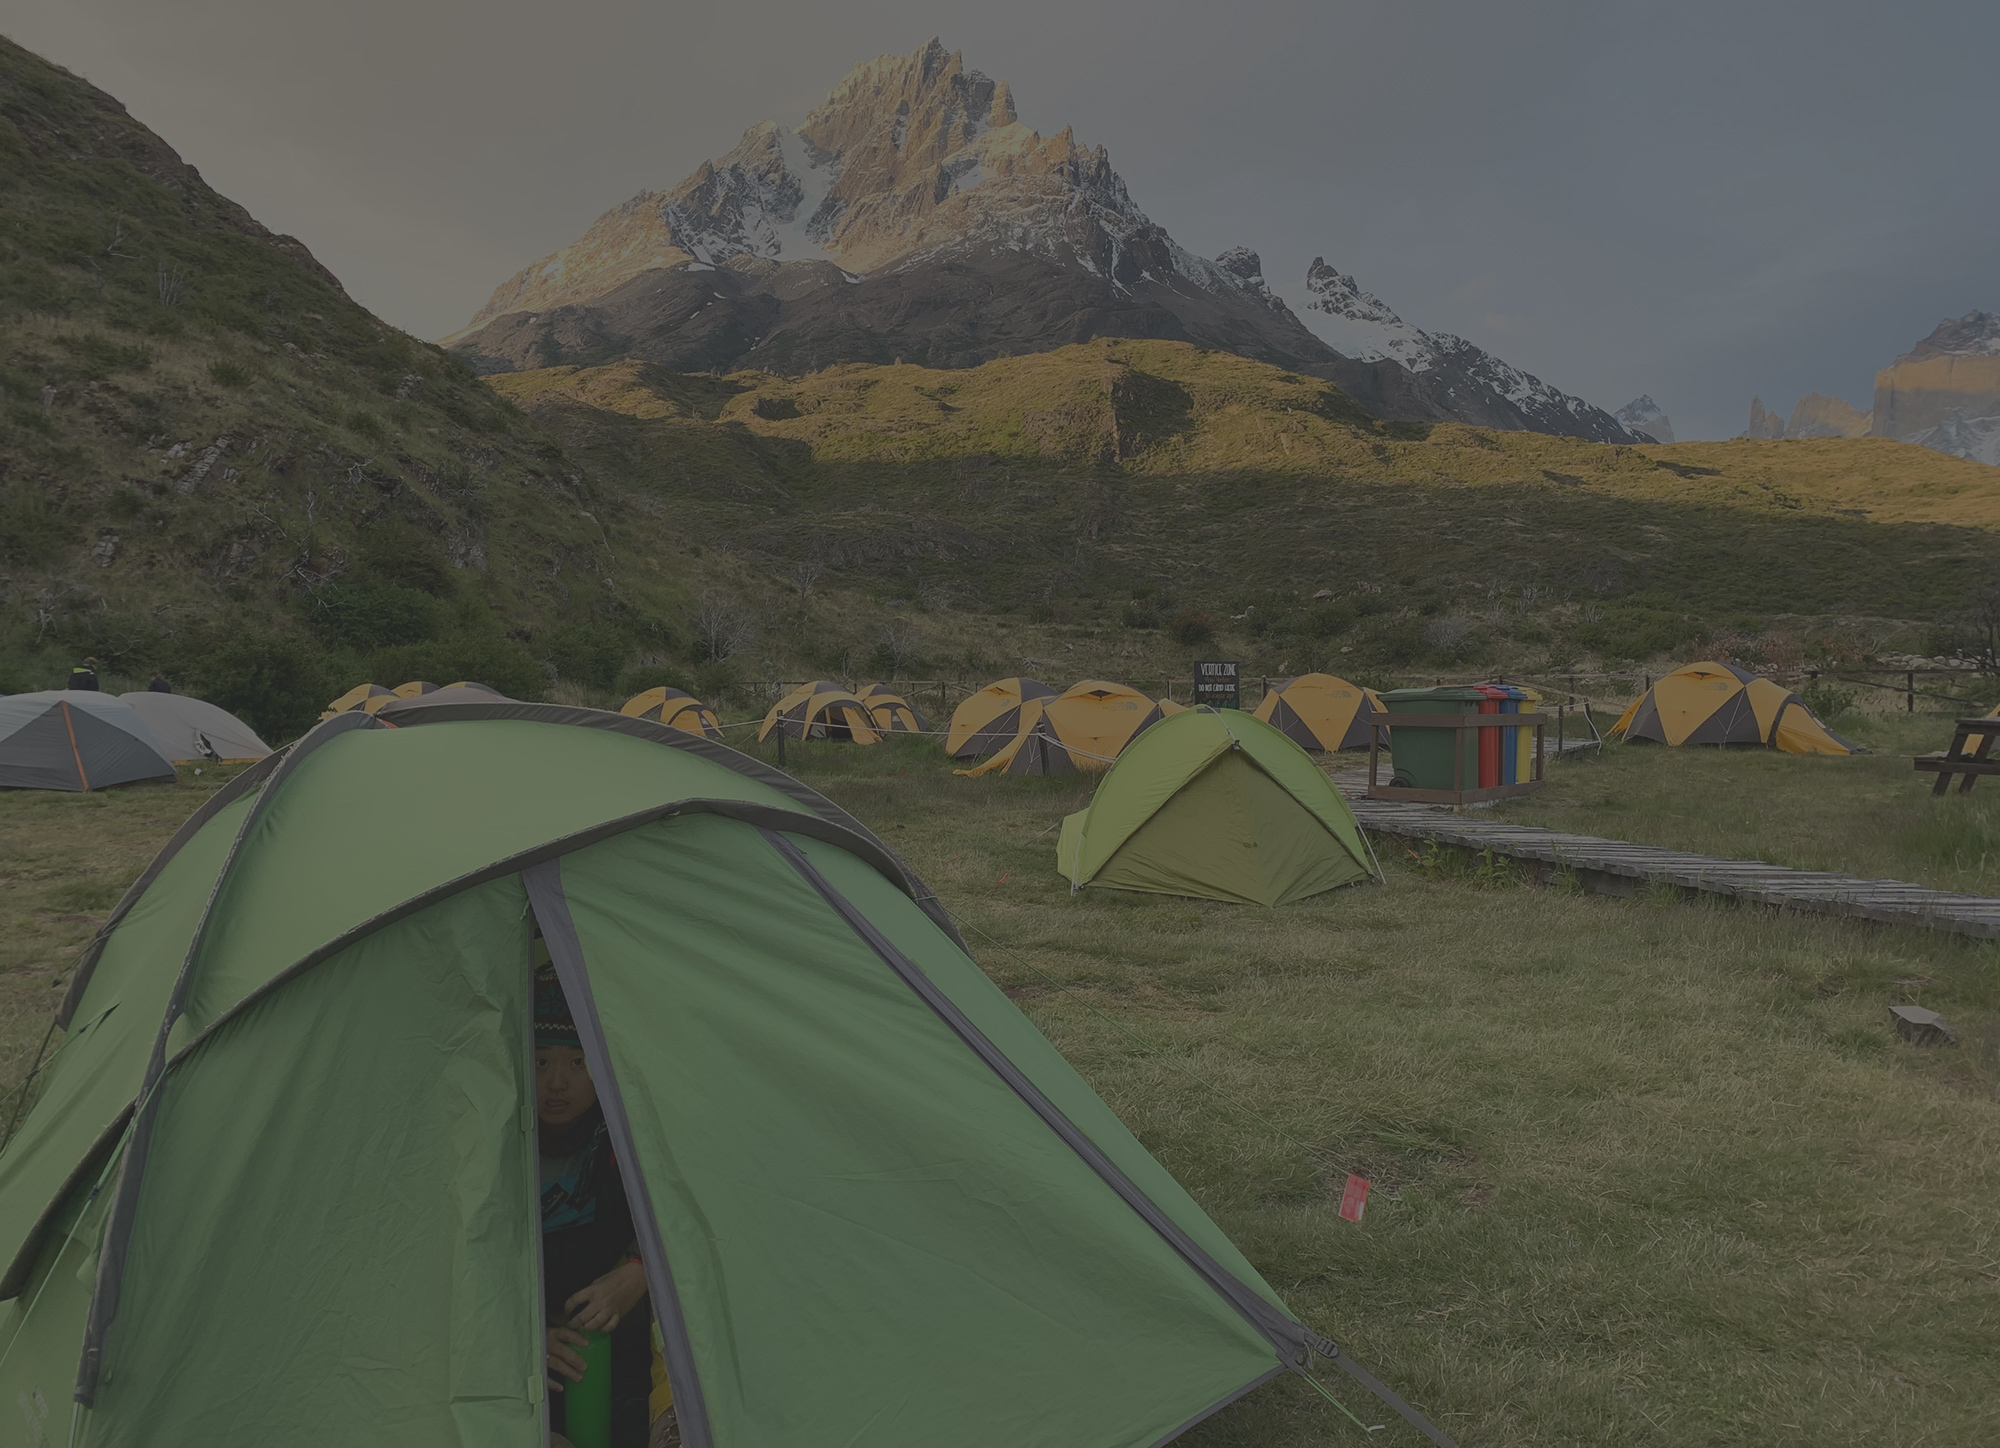 The Best and Worst Days in Patagonia